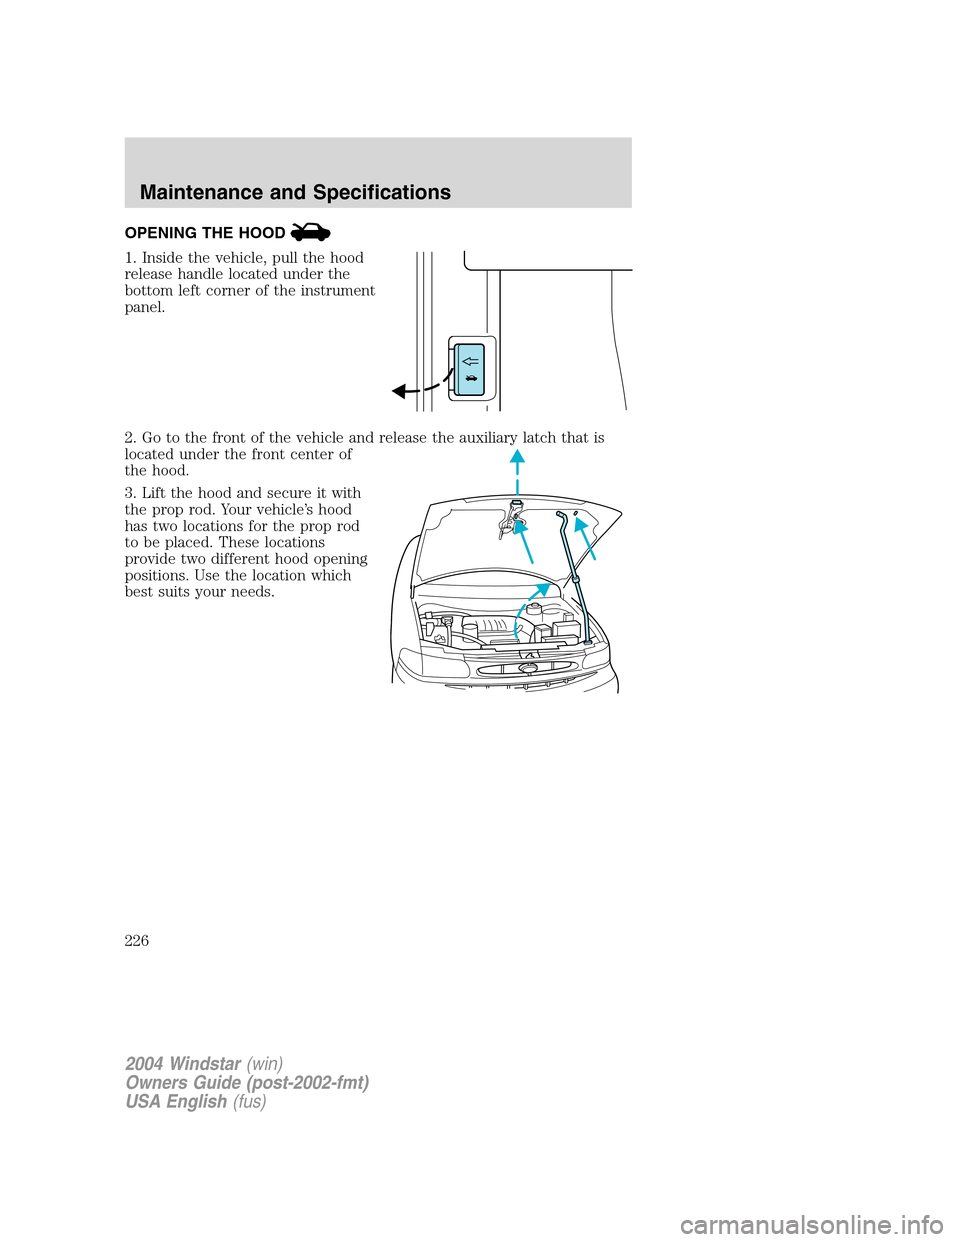 FORD FREESTAR 2004 1.G Owners Manual OPENING THE HOOD
1. Inside the vehicle, pull the hood
release handle located under the
bottom left corner of the instrument
panel.
2. Go to the front of the vehicle and release the auxiliary latch tha